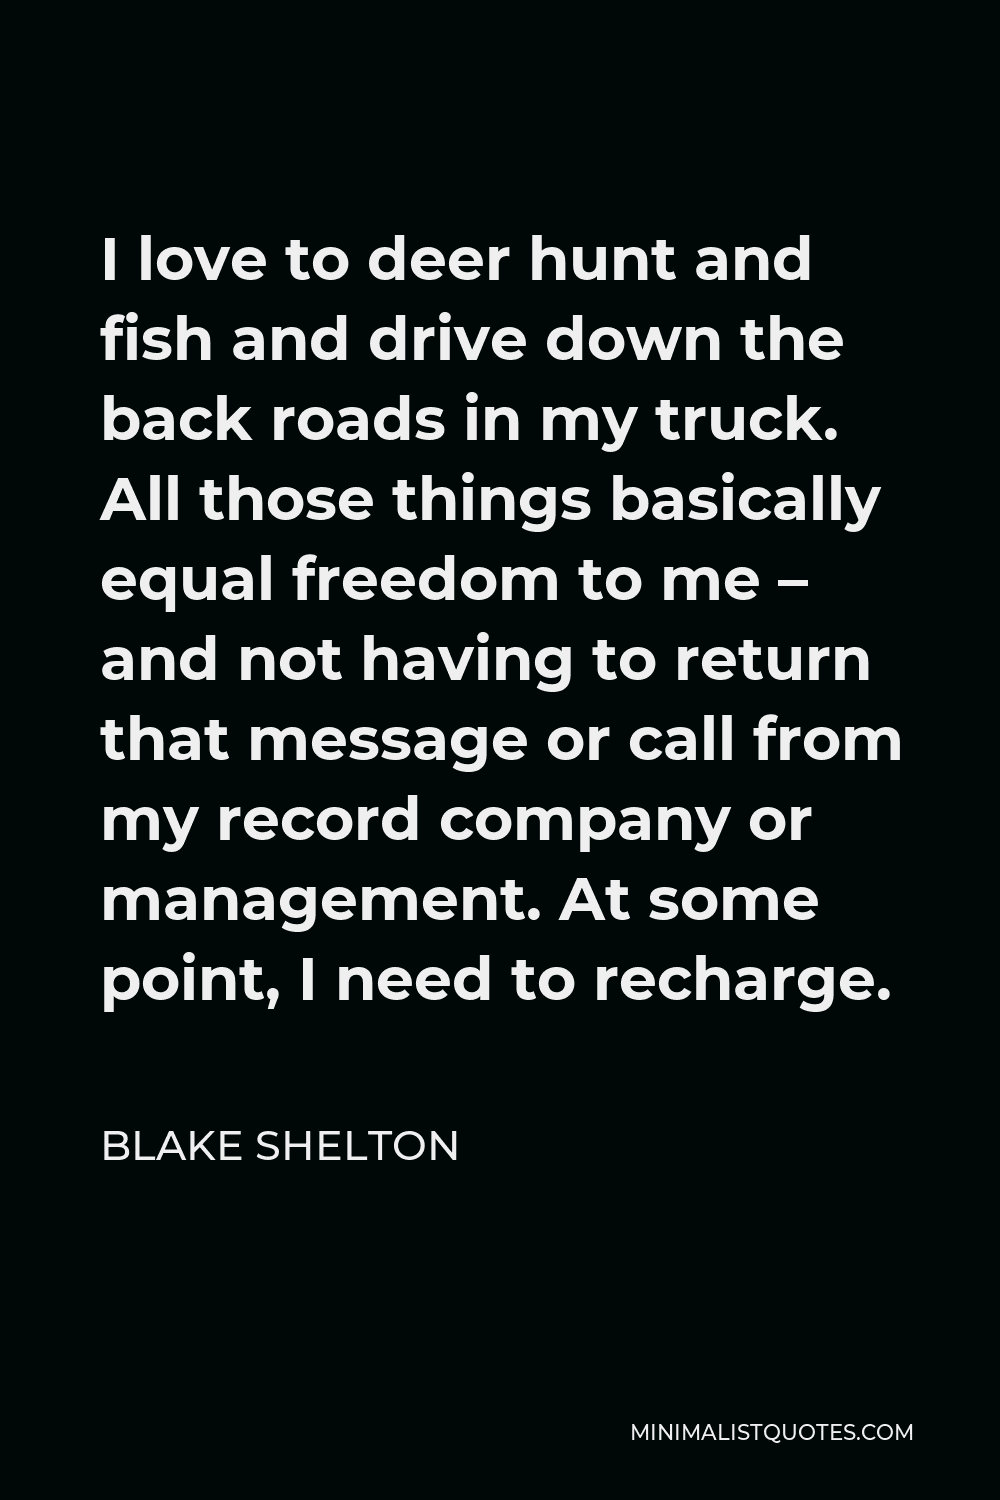 Blake Shelton Quote - I love to deer hunt and fish and drive down the back roads in my truck. All those things basically equal freedom to me – and not having to return that message or call from my record company or management. At some point, I need to recharge.